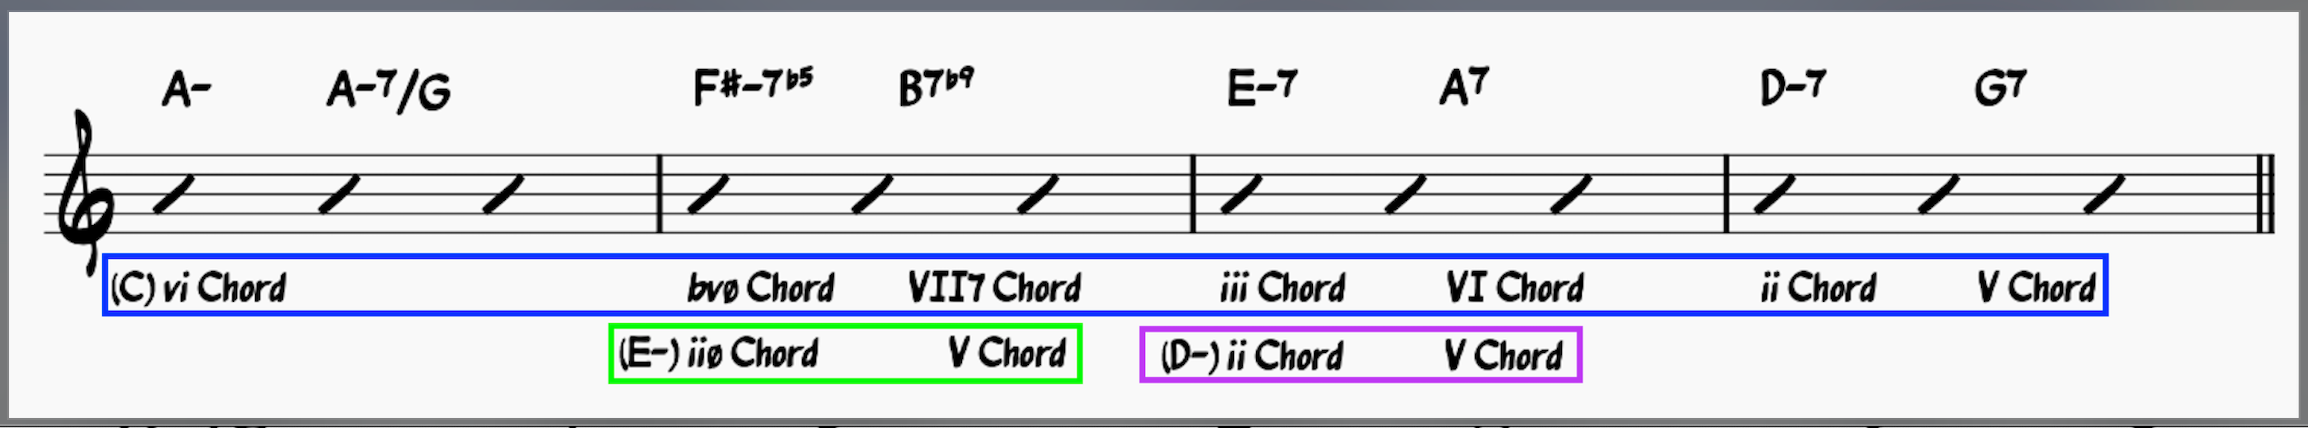 Moon River chords: Second system of the B section of Moon River